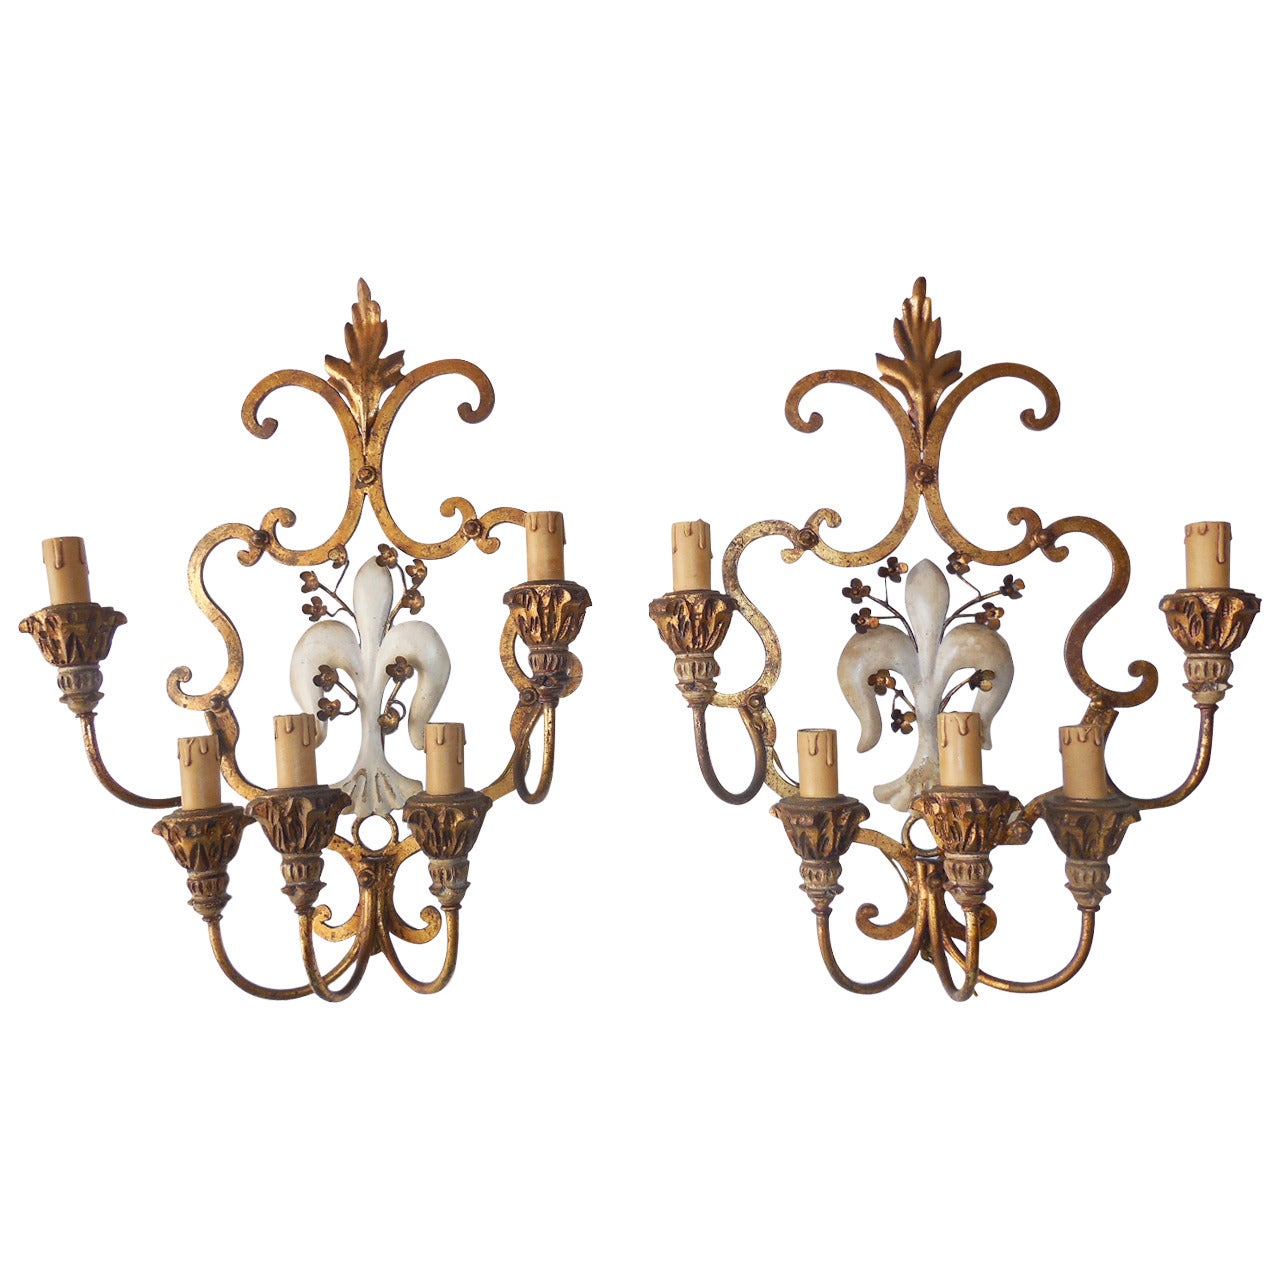 Huge French Wrought Iron Fleur di Lys Sconces